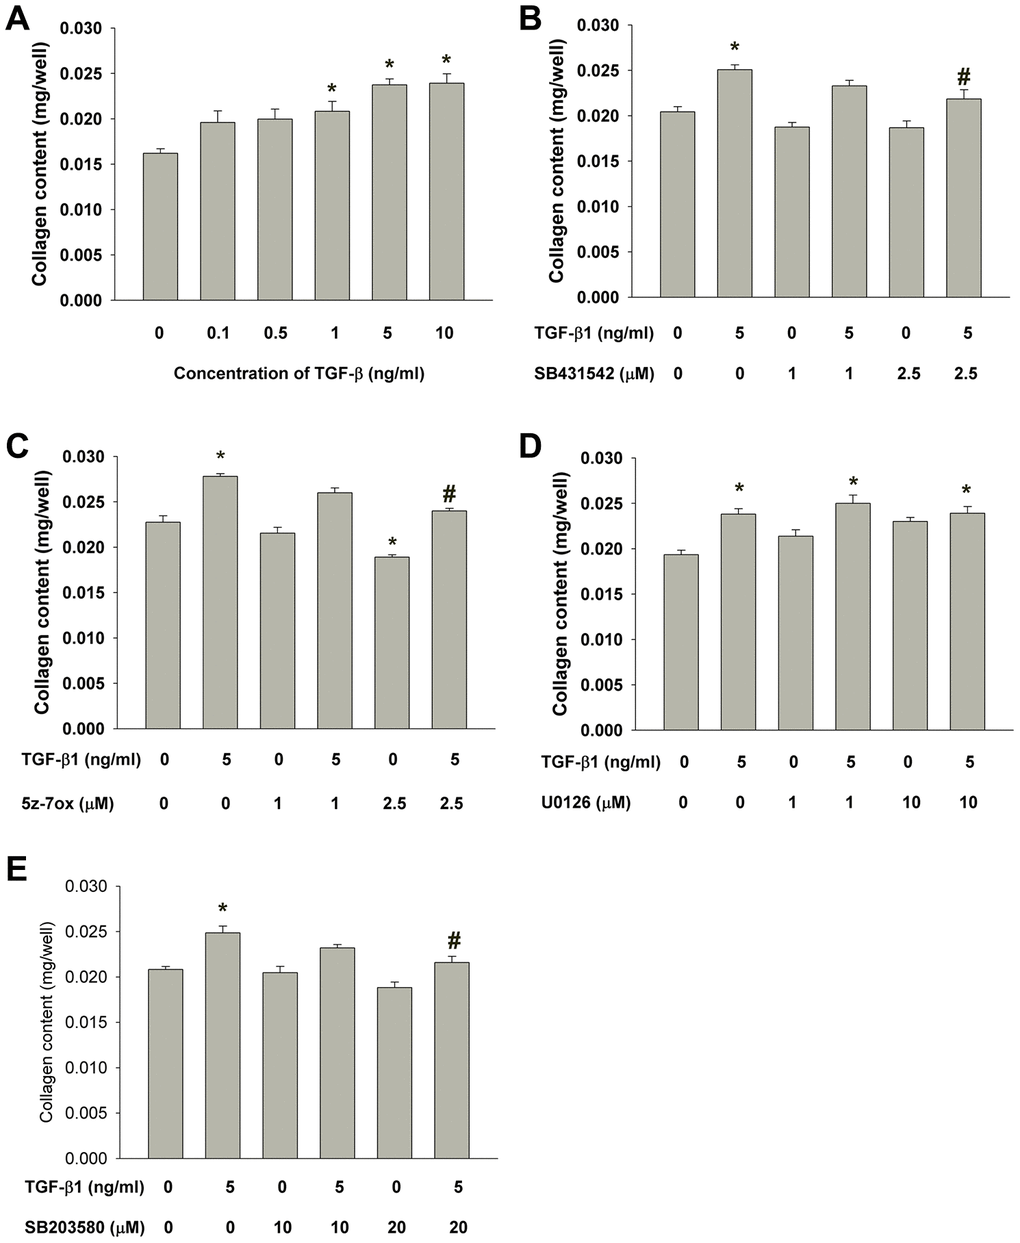 Effect of TGF-β1 on the collagen content of cultured SHED. (A) Collagen content of SHED after exposure to TGF-β1 for 5 days as measured by Sircol collagen assay. Results were expressed Mean ± SE. (B) Effect of SB431542 on the TGF-β1-induced increase in collagen content of SHED. (C) Effect of 5z-7oxozeaenol on the TGF-β1-induced increase in collagen content of SHED. (D) Effect of U0126 on the TGF-β1-induced increase in collagen content of SHED. (E) Effect of SB203580 on the TGF-β1-induced increase in collagen content of SHED. *Denotes statistically significant difference when compared to control, #denotes statistically significant difference when compared with TGF-β1 (5 ng/ml)-treated group.